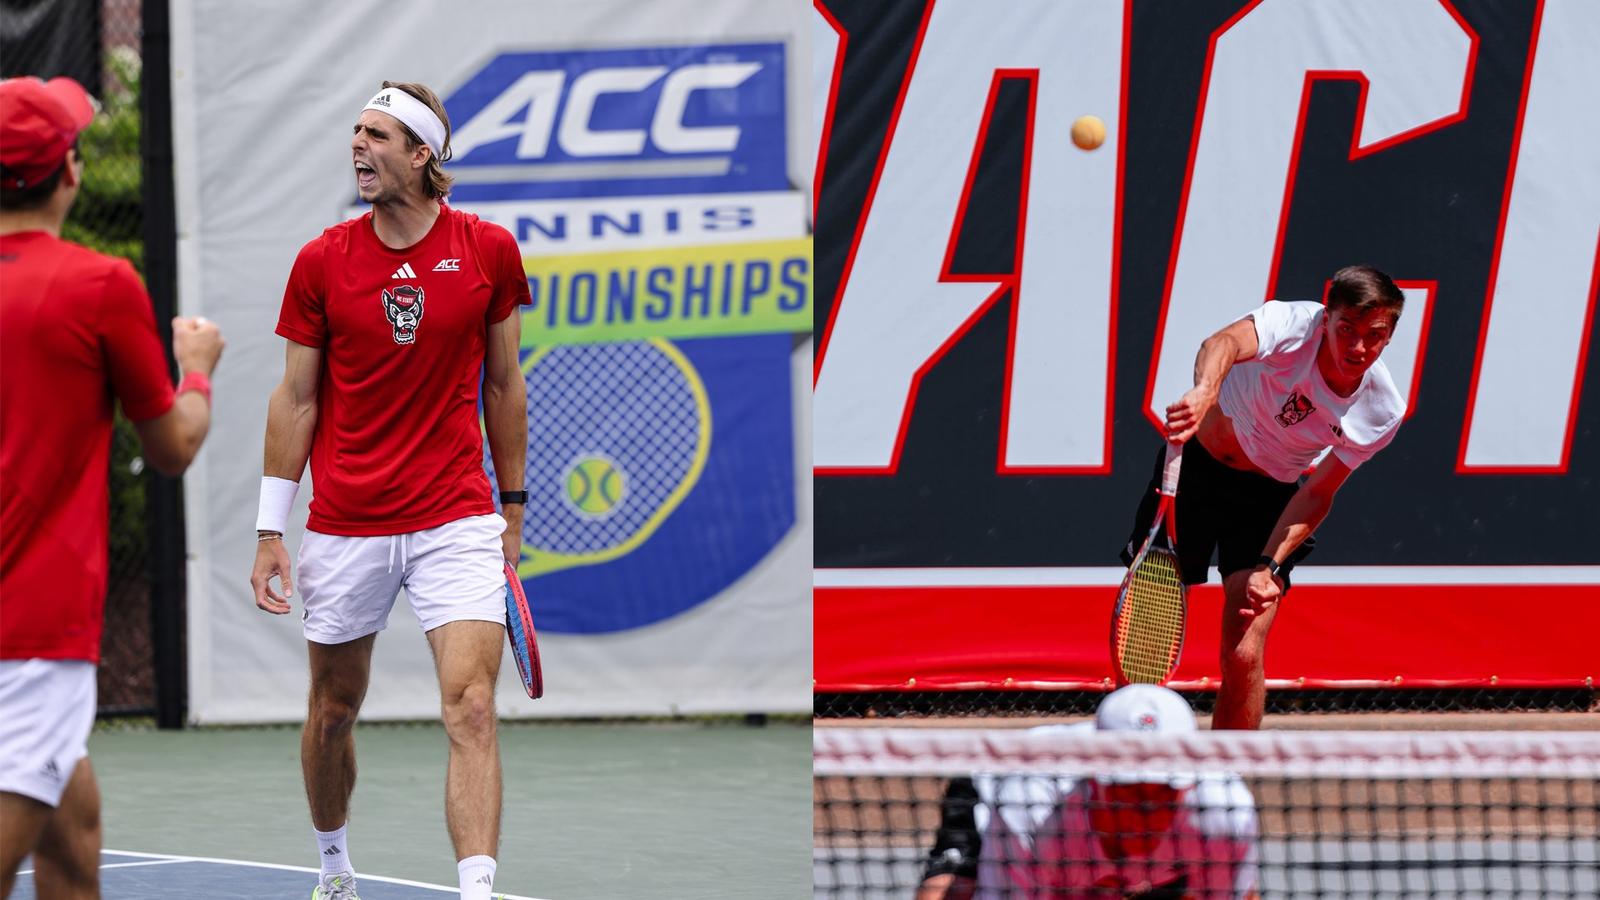 Robin Carty and Braden Shick Recognized In All-ACC Yearly Honors